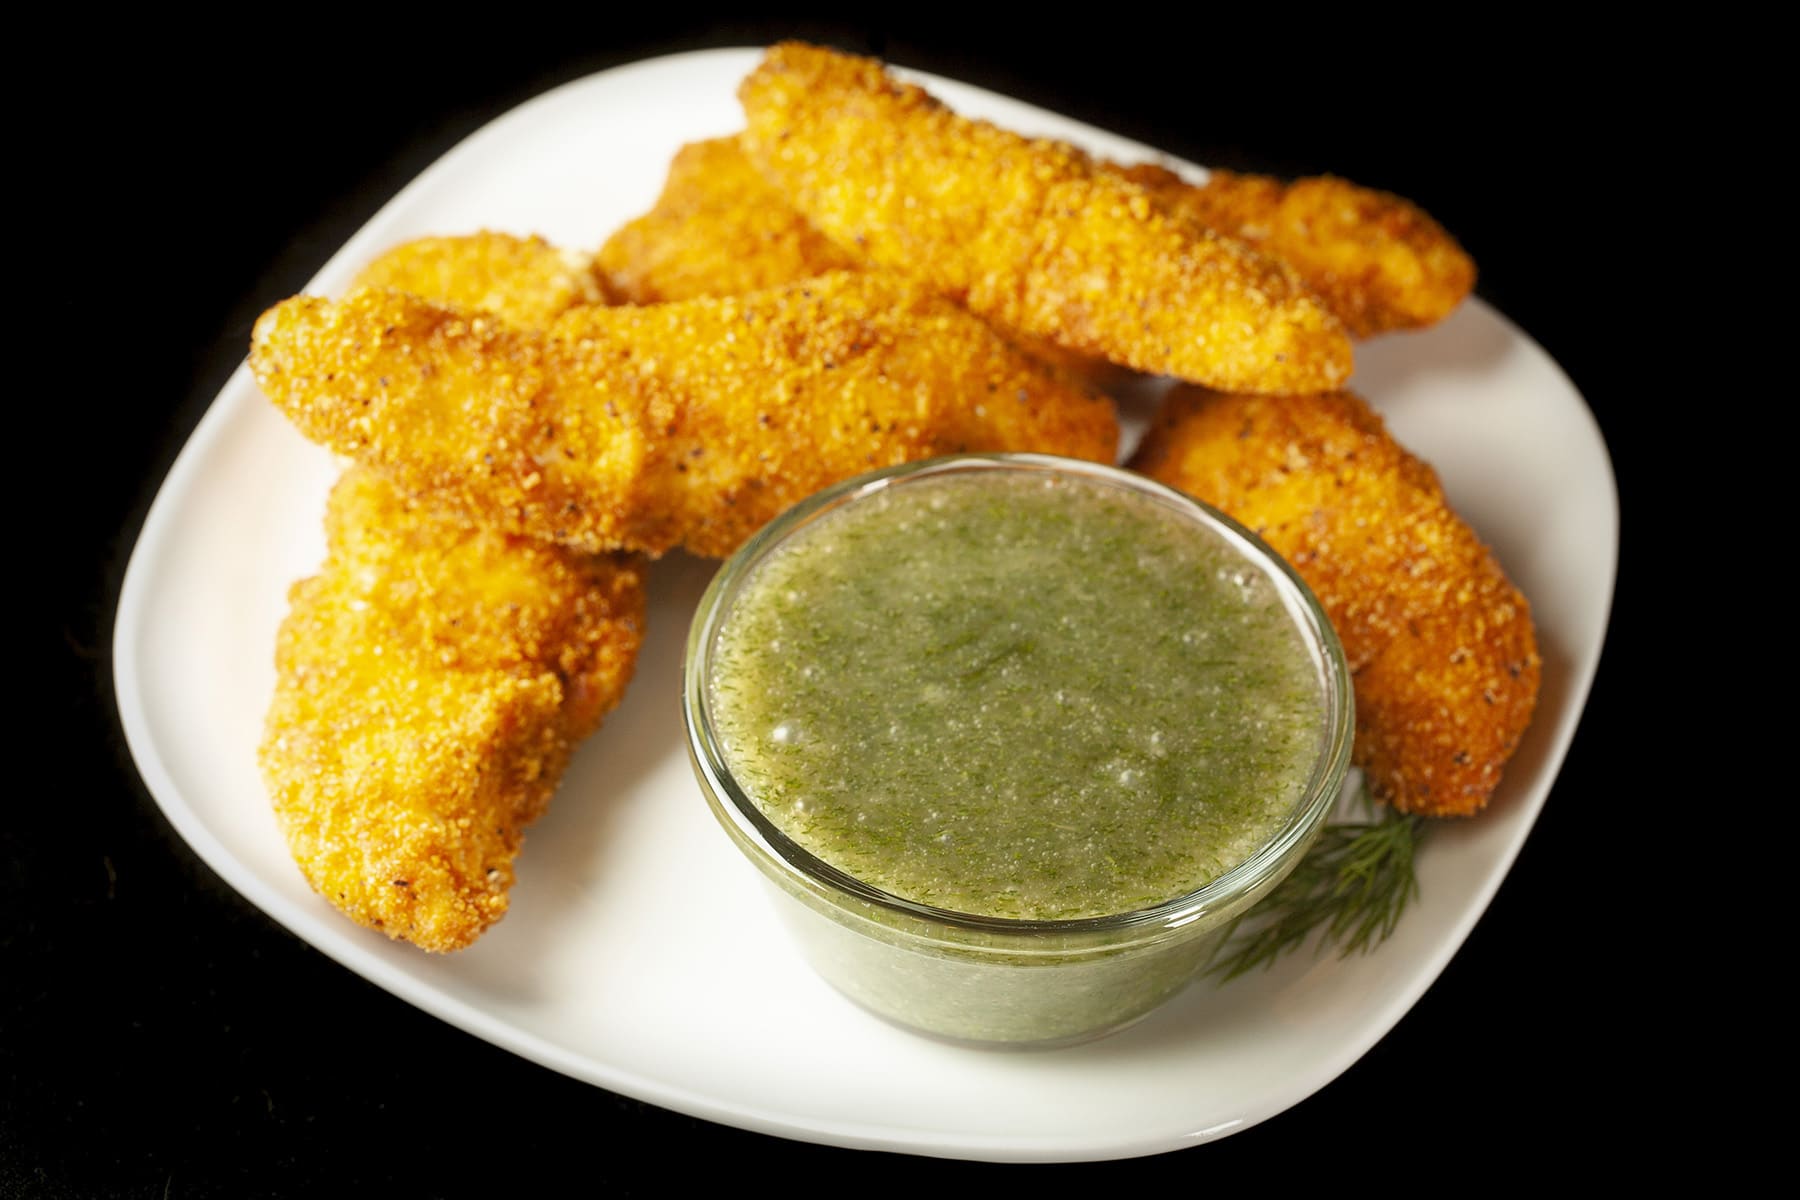 A square shaped white plate with several golden brown chicken tenders on it, along with a glass bowl full of honey dill sauce.